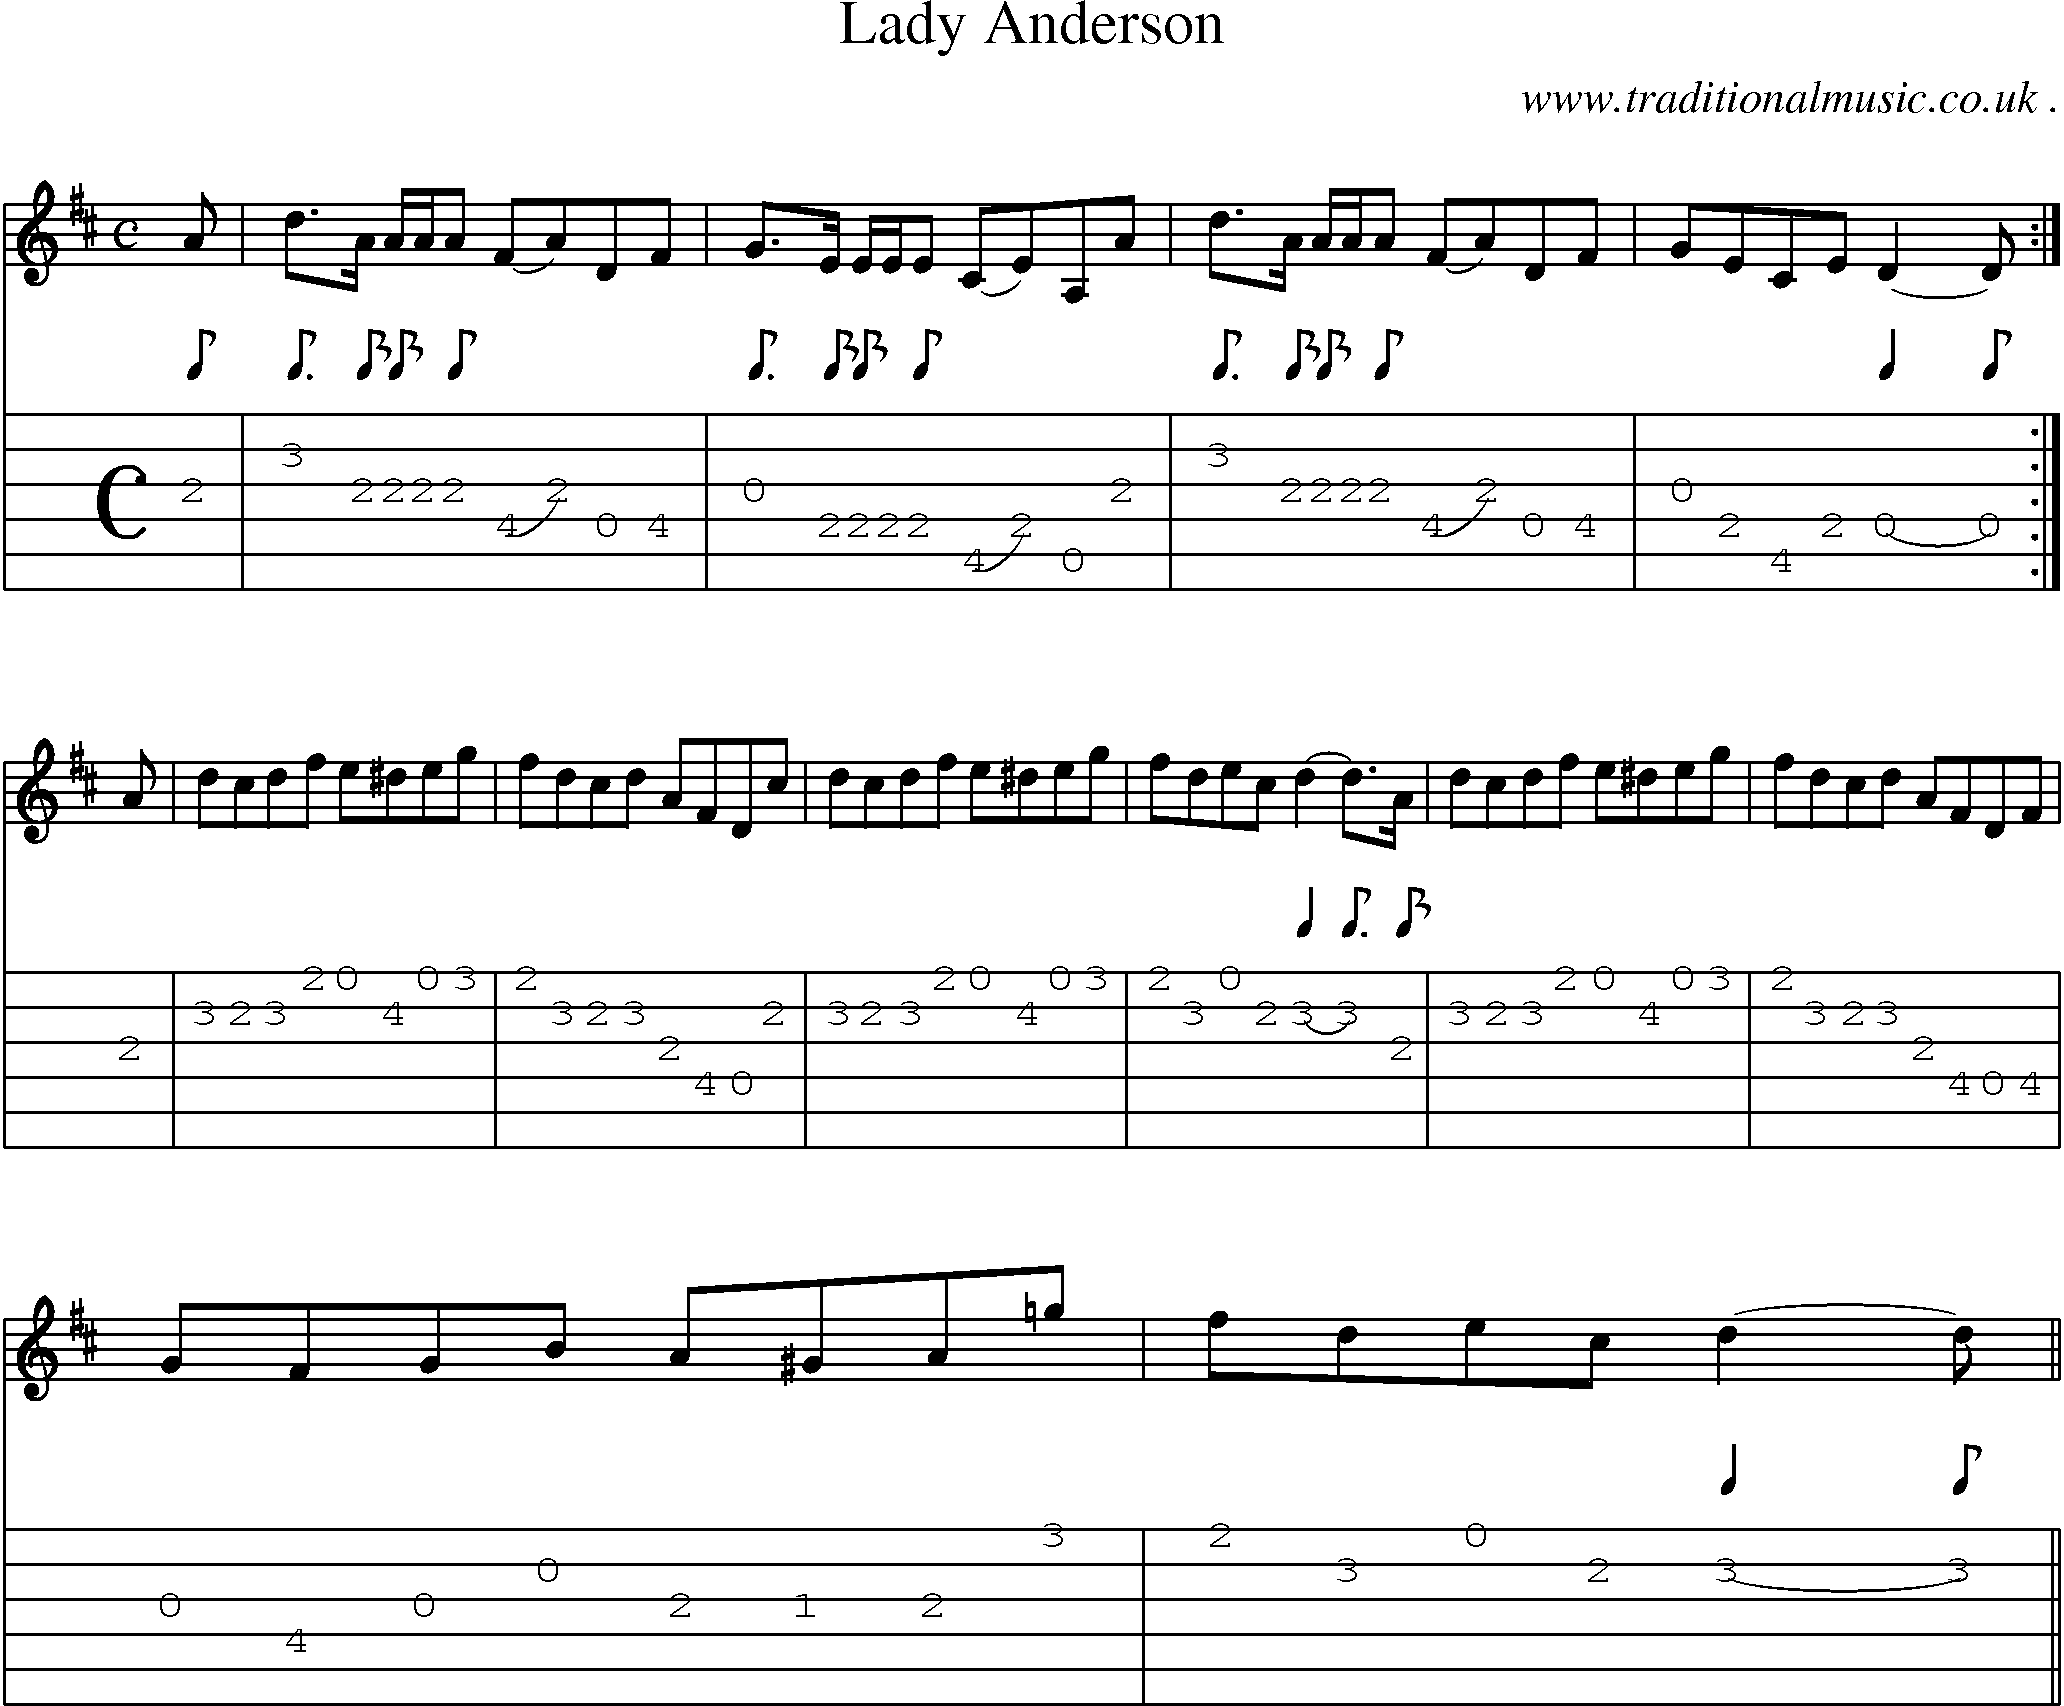 Sheet-music  score, Chords and Guitar Tabs for Lady Anderson